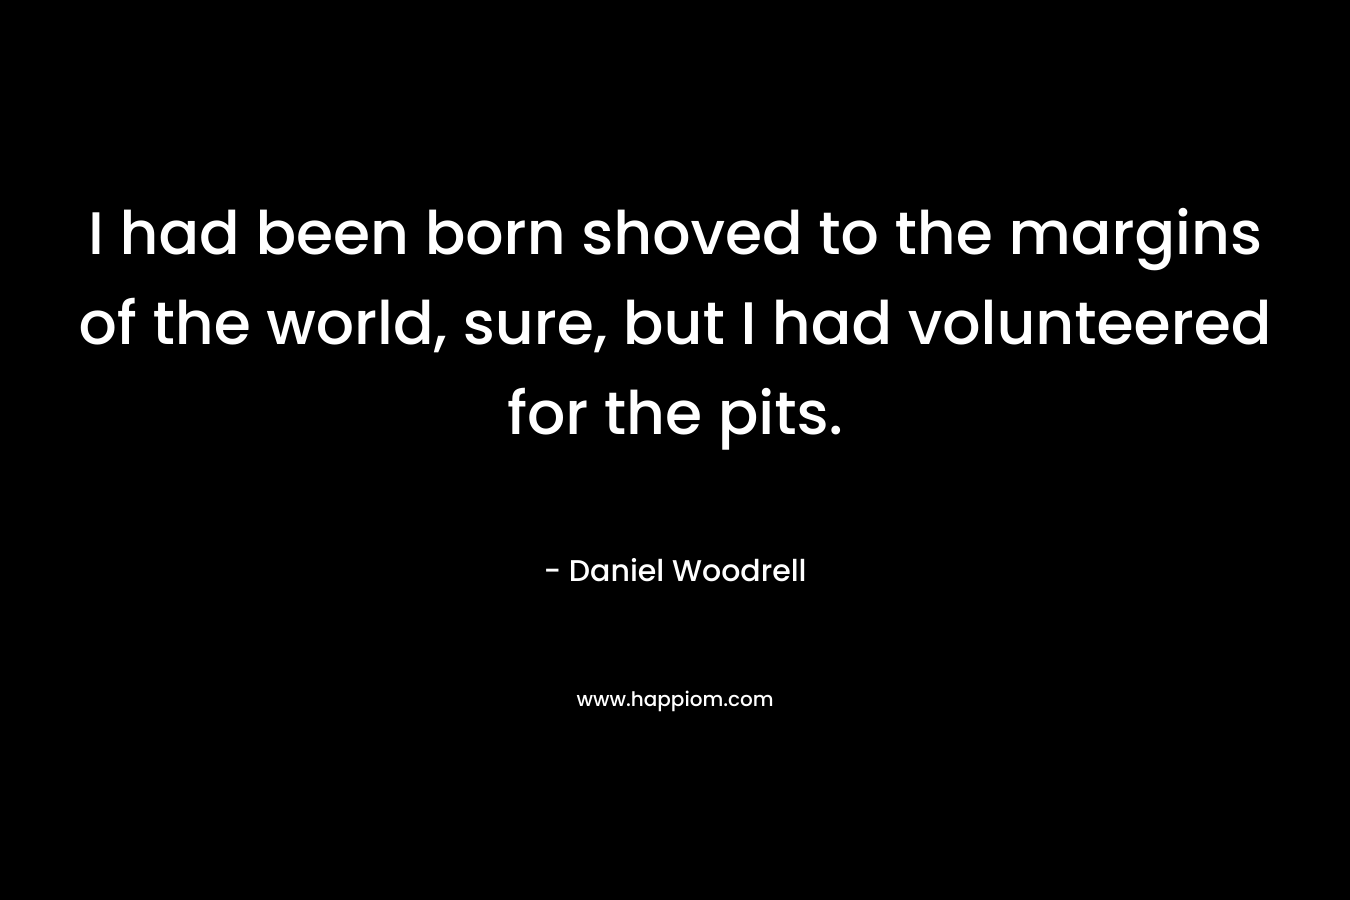 I had been born shoved to the margins of the world, sure, but I had volunteered for the pits.